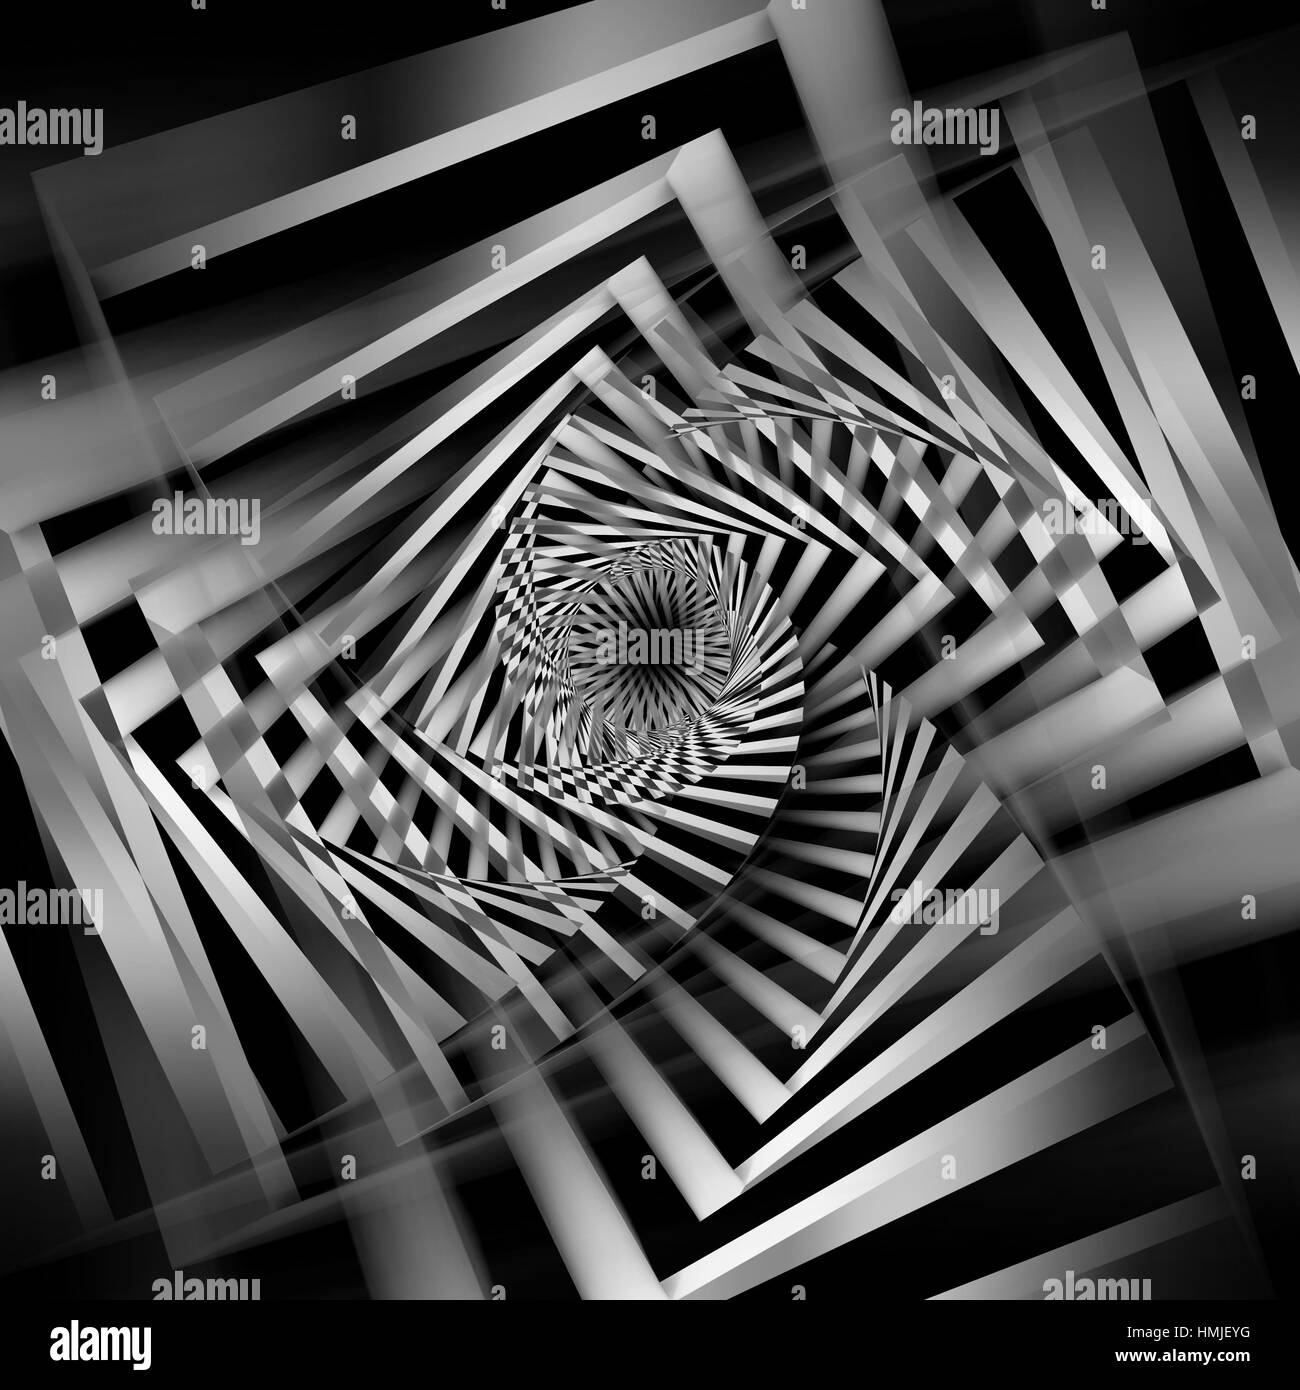 Abstract black and white spirals pattern, cg optical illusion, square 3d illustration Stock Photo